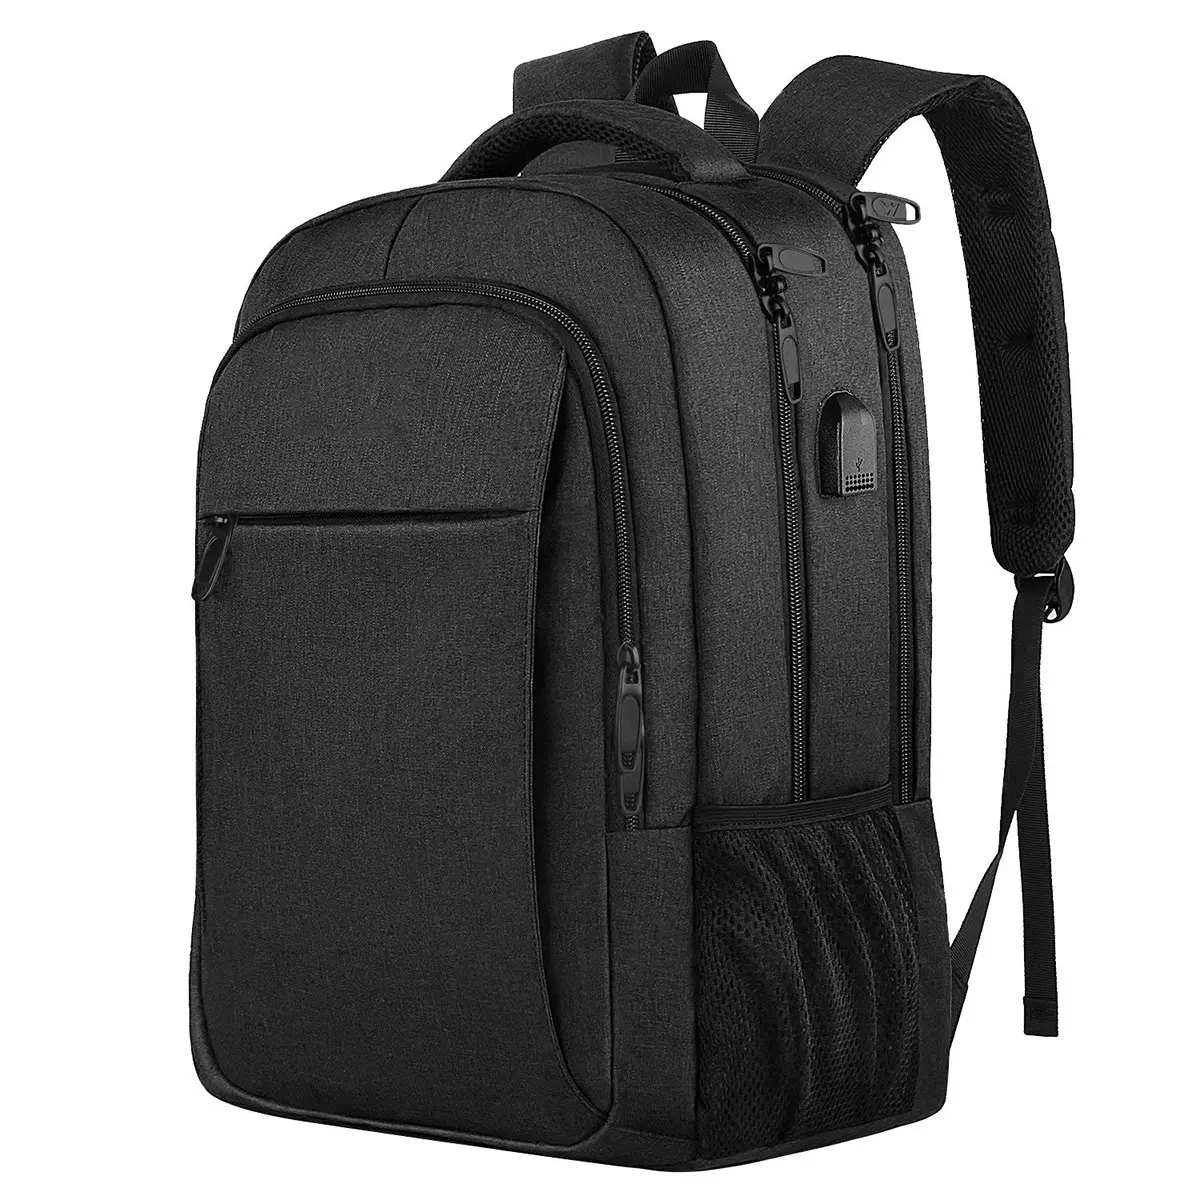 College School Durable Laptops Backpack with USB Charging Water Resistant Business Anti Theft Travel Laptop Backpack